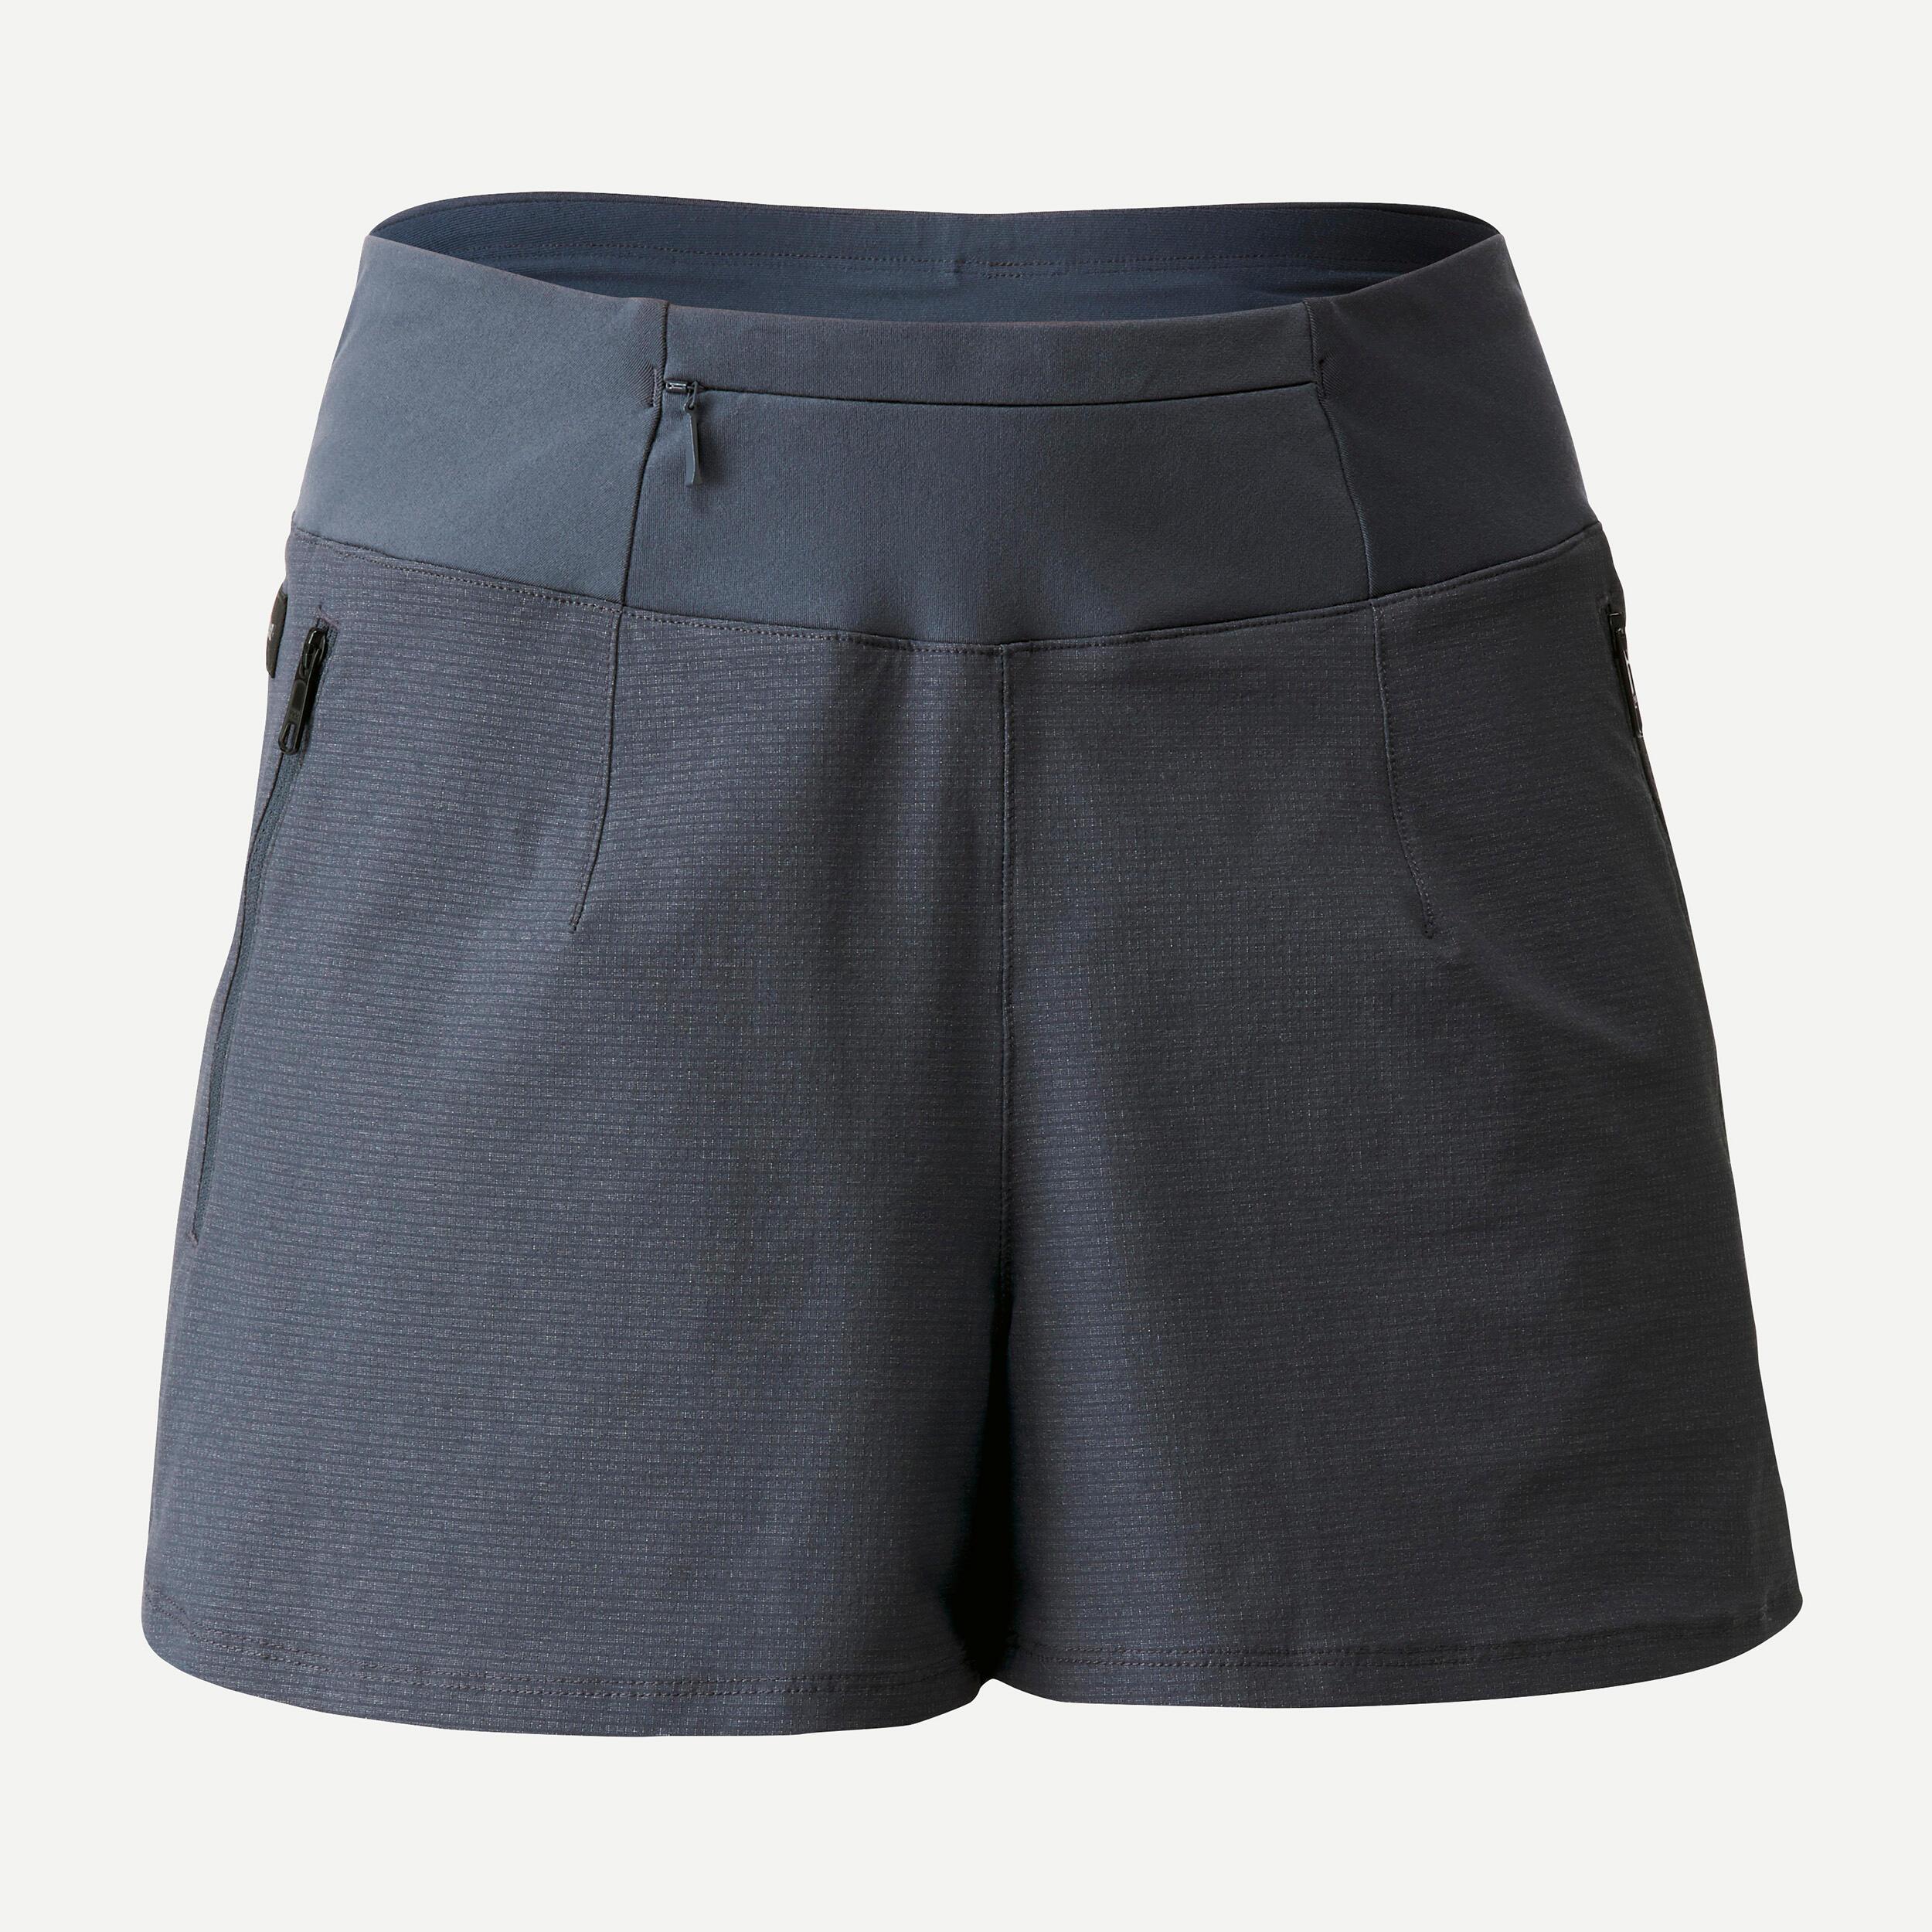 Women's Hiking Shorts: Hit the Trail in Comfort with Women's Hiking Shorts